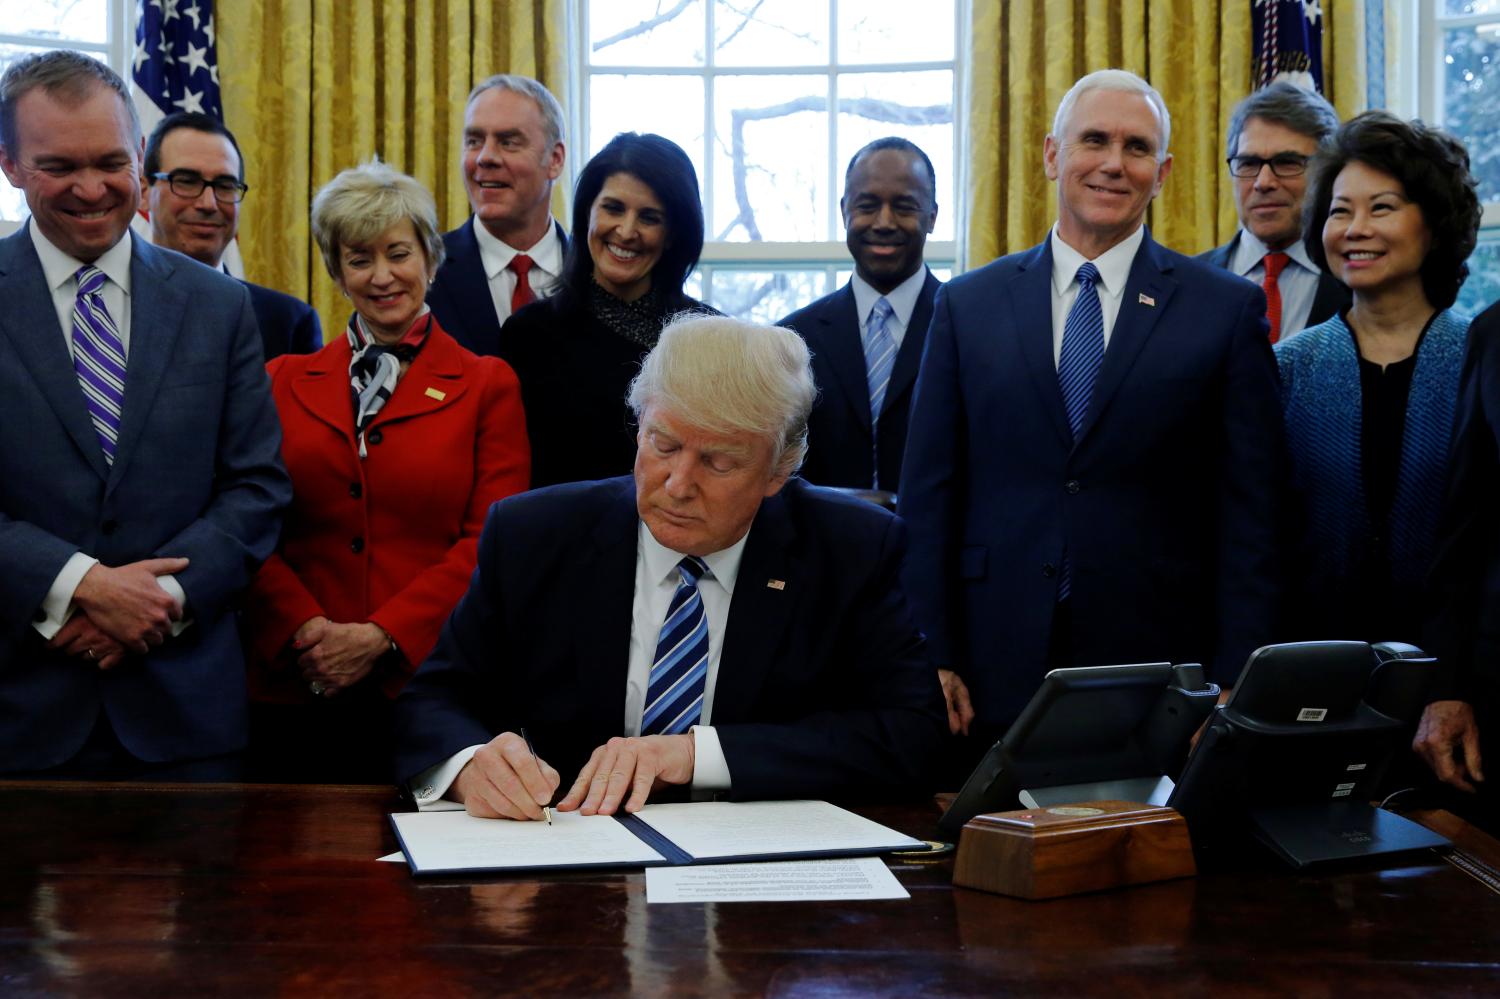 Trump signs an executive order in the Oval Office at the White House in Washington